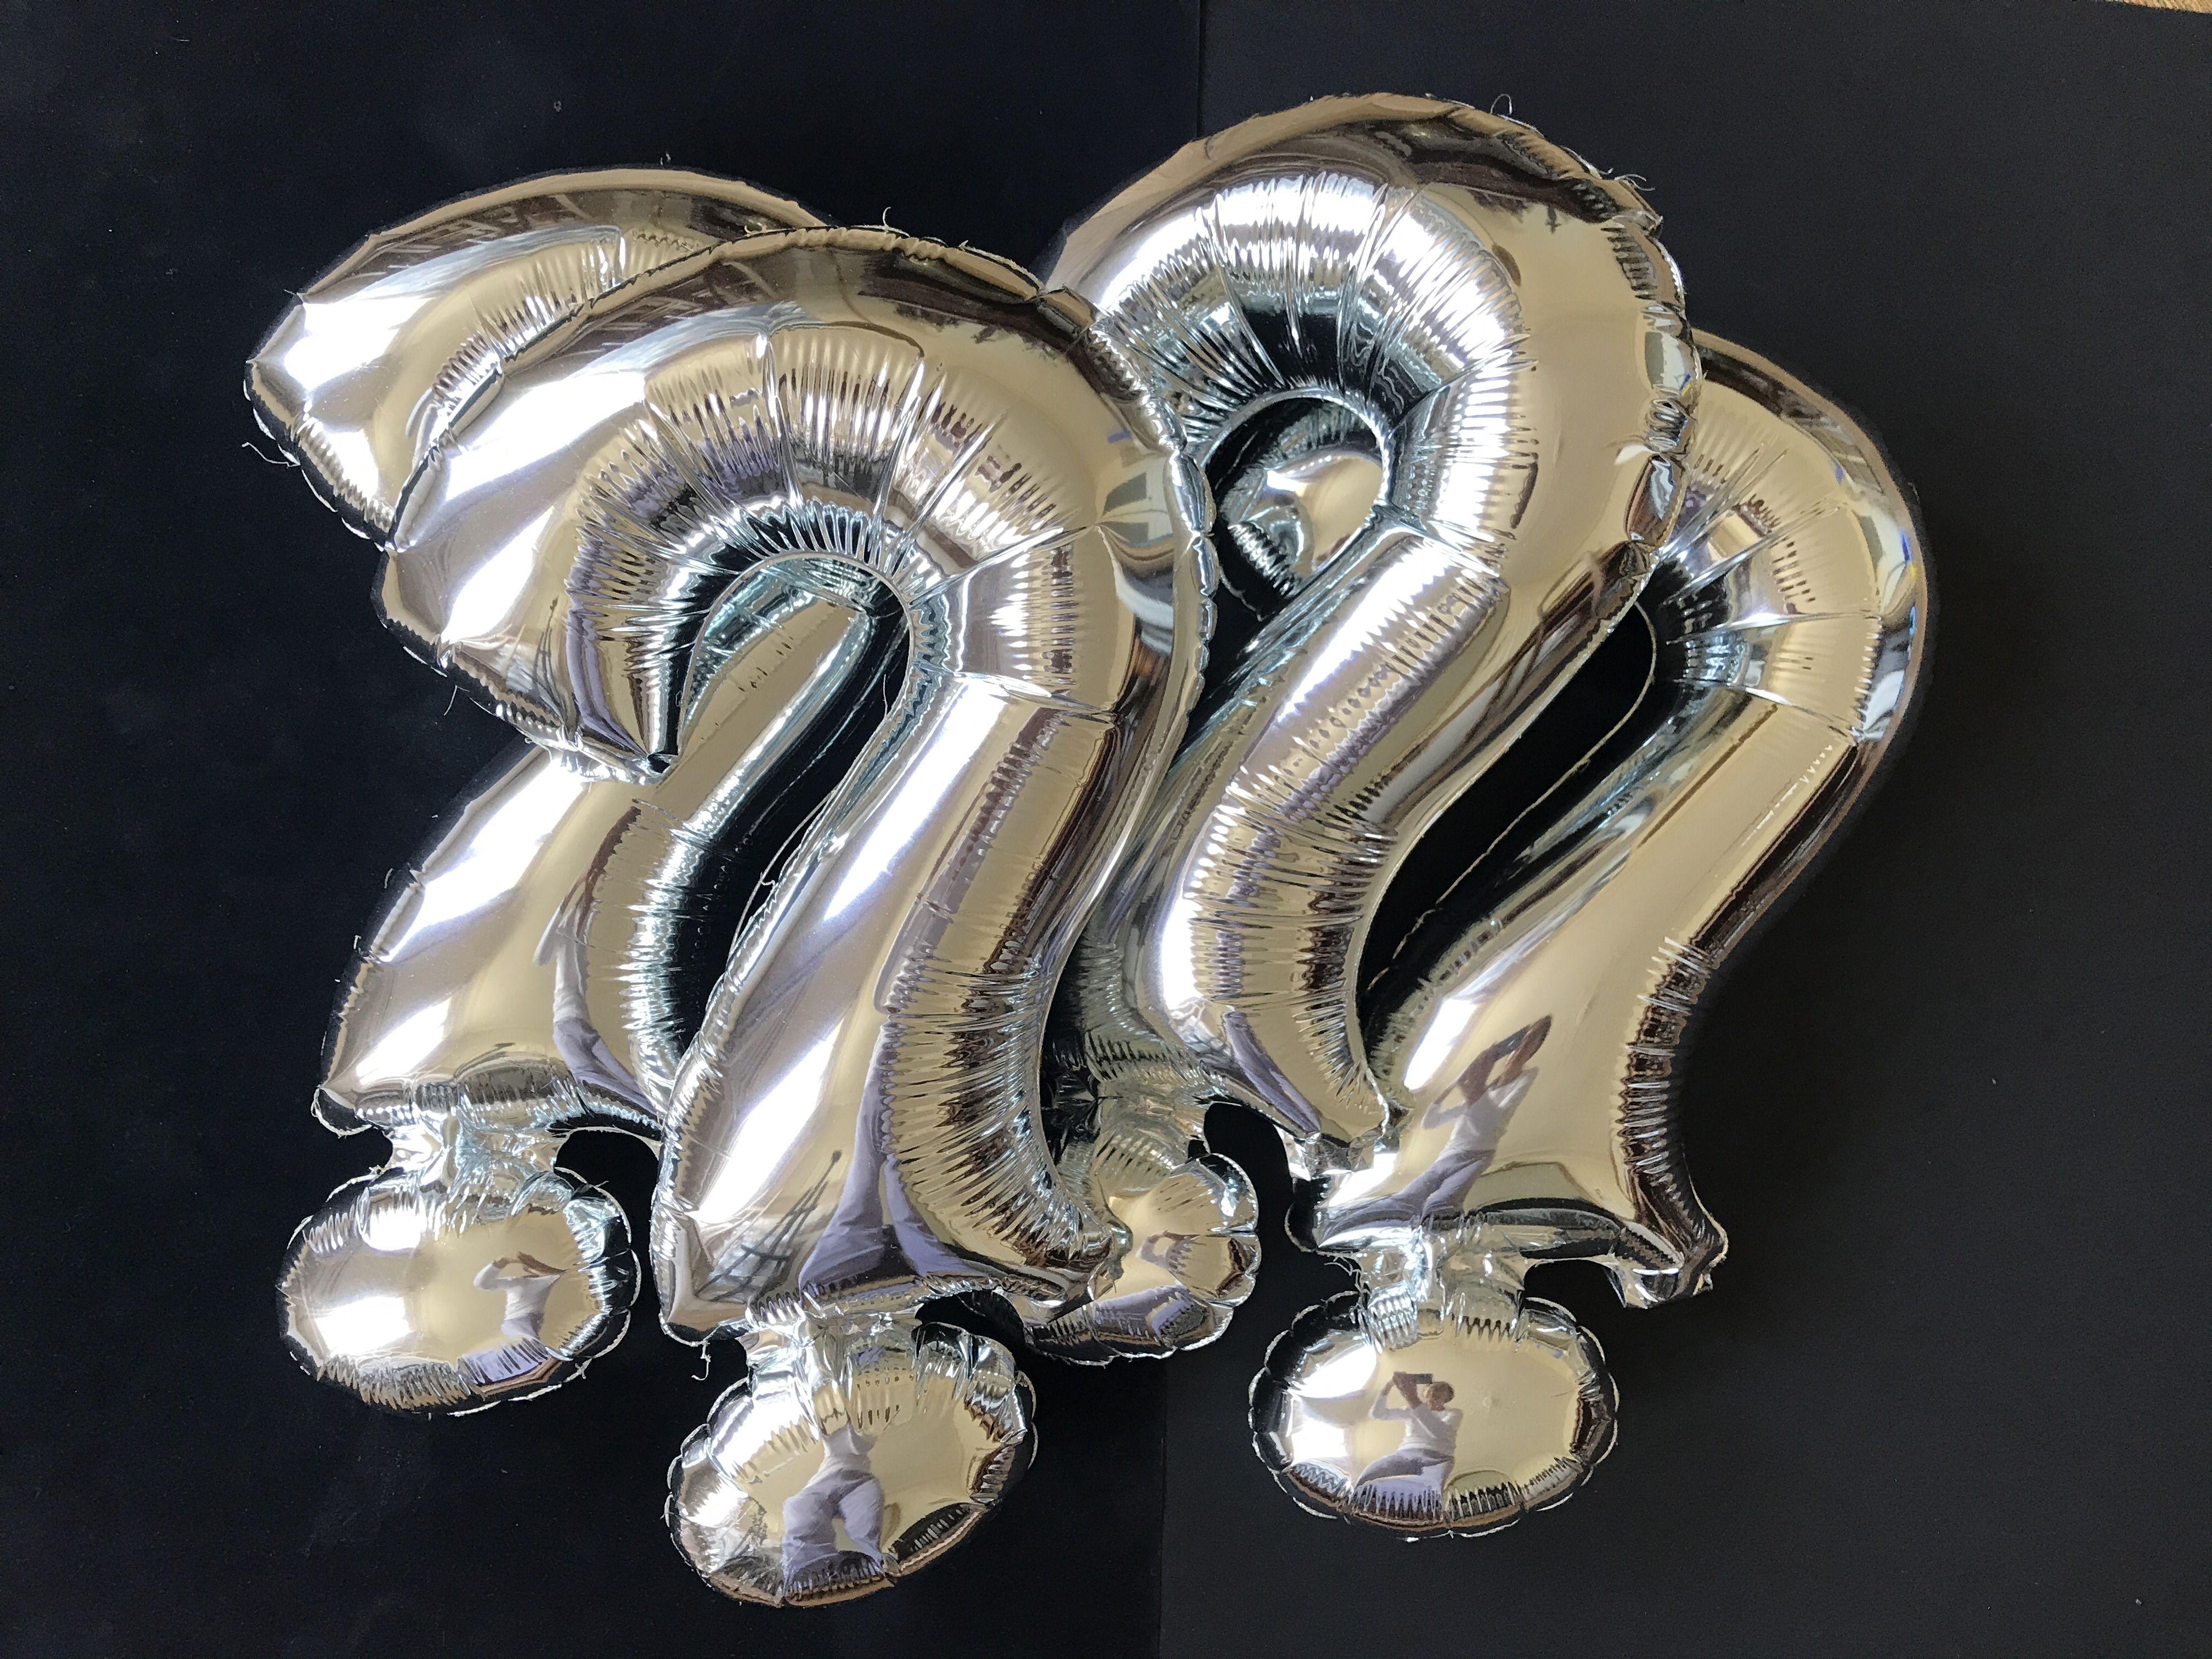 Four silver balloons representing question marks on a black background; Painted with several layers of paint on a fine canvas,  :: Painting :: Photorealism :: This piece comes with an official certificate of authenticity signed by the artist ::